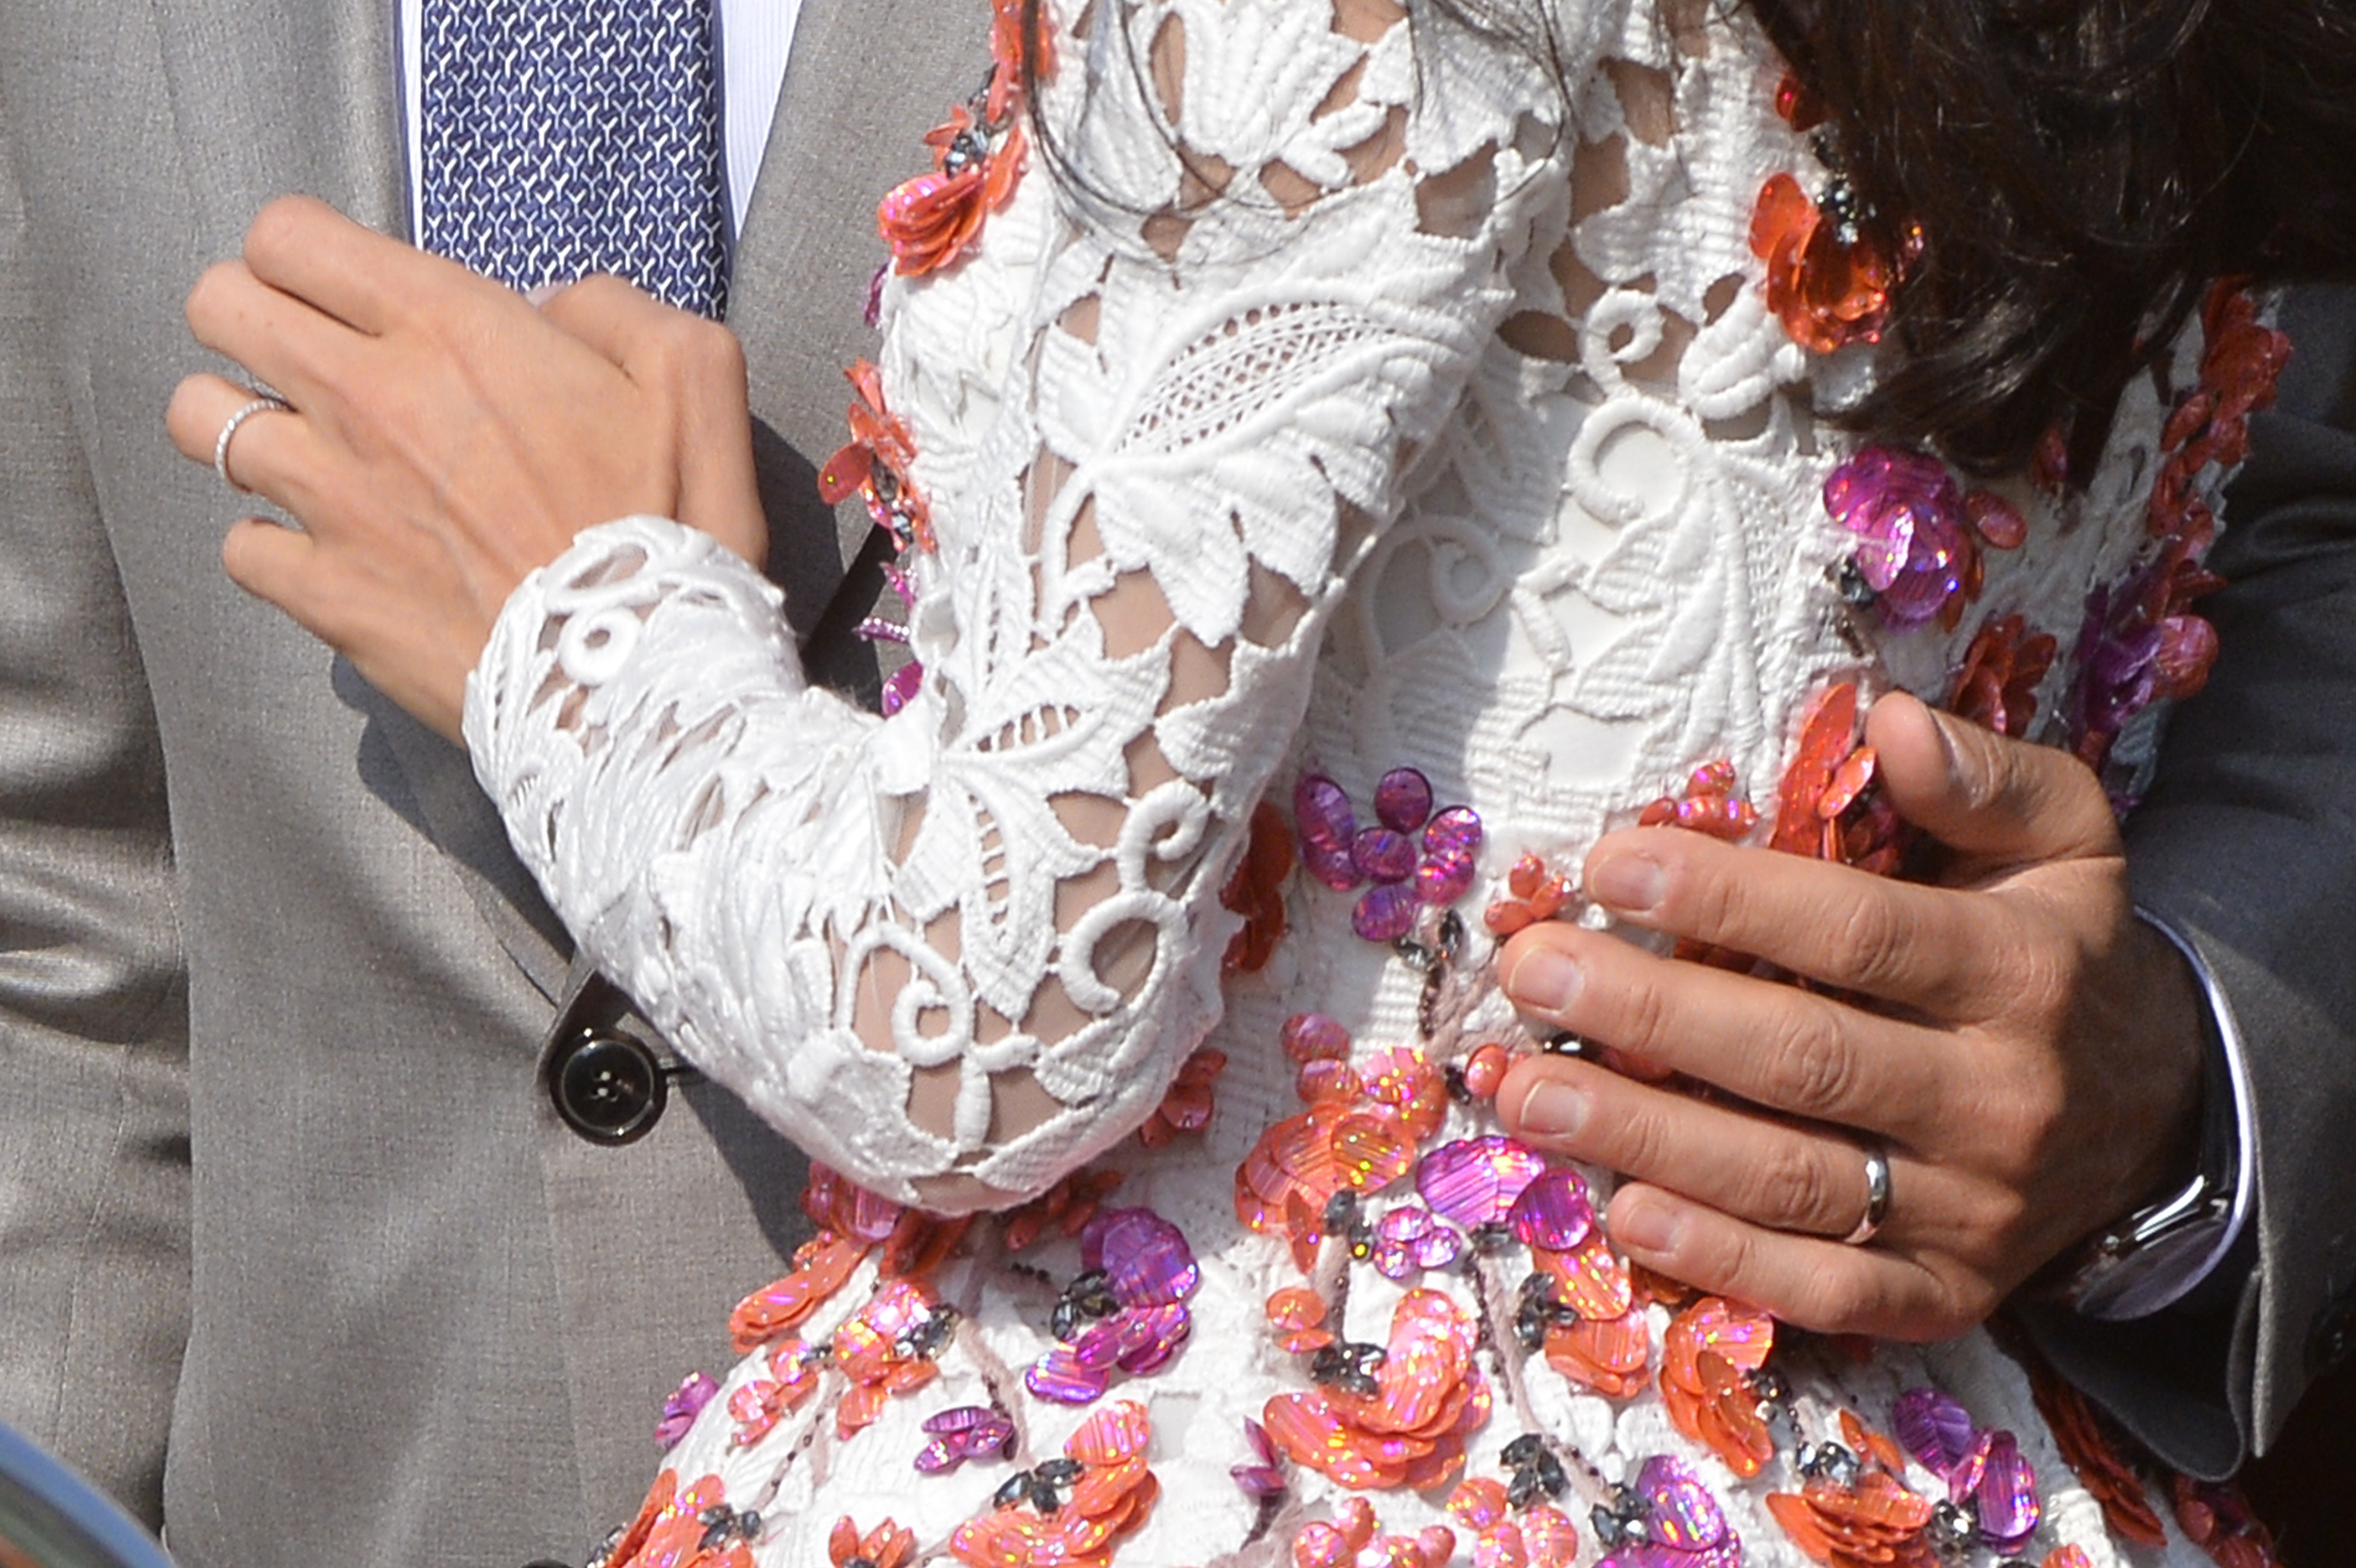 A close-up shot of George and Amal Clooney's wedding rings | Source: Getty Images